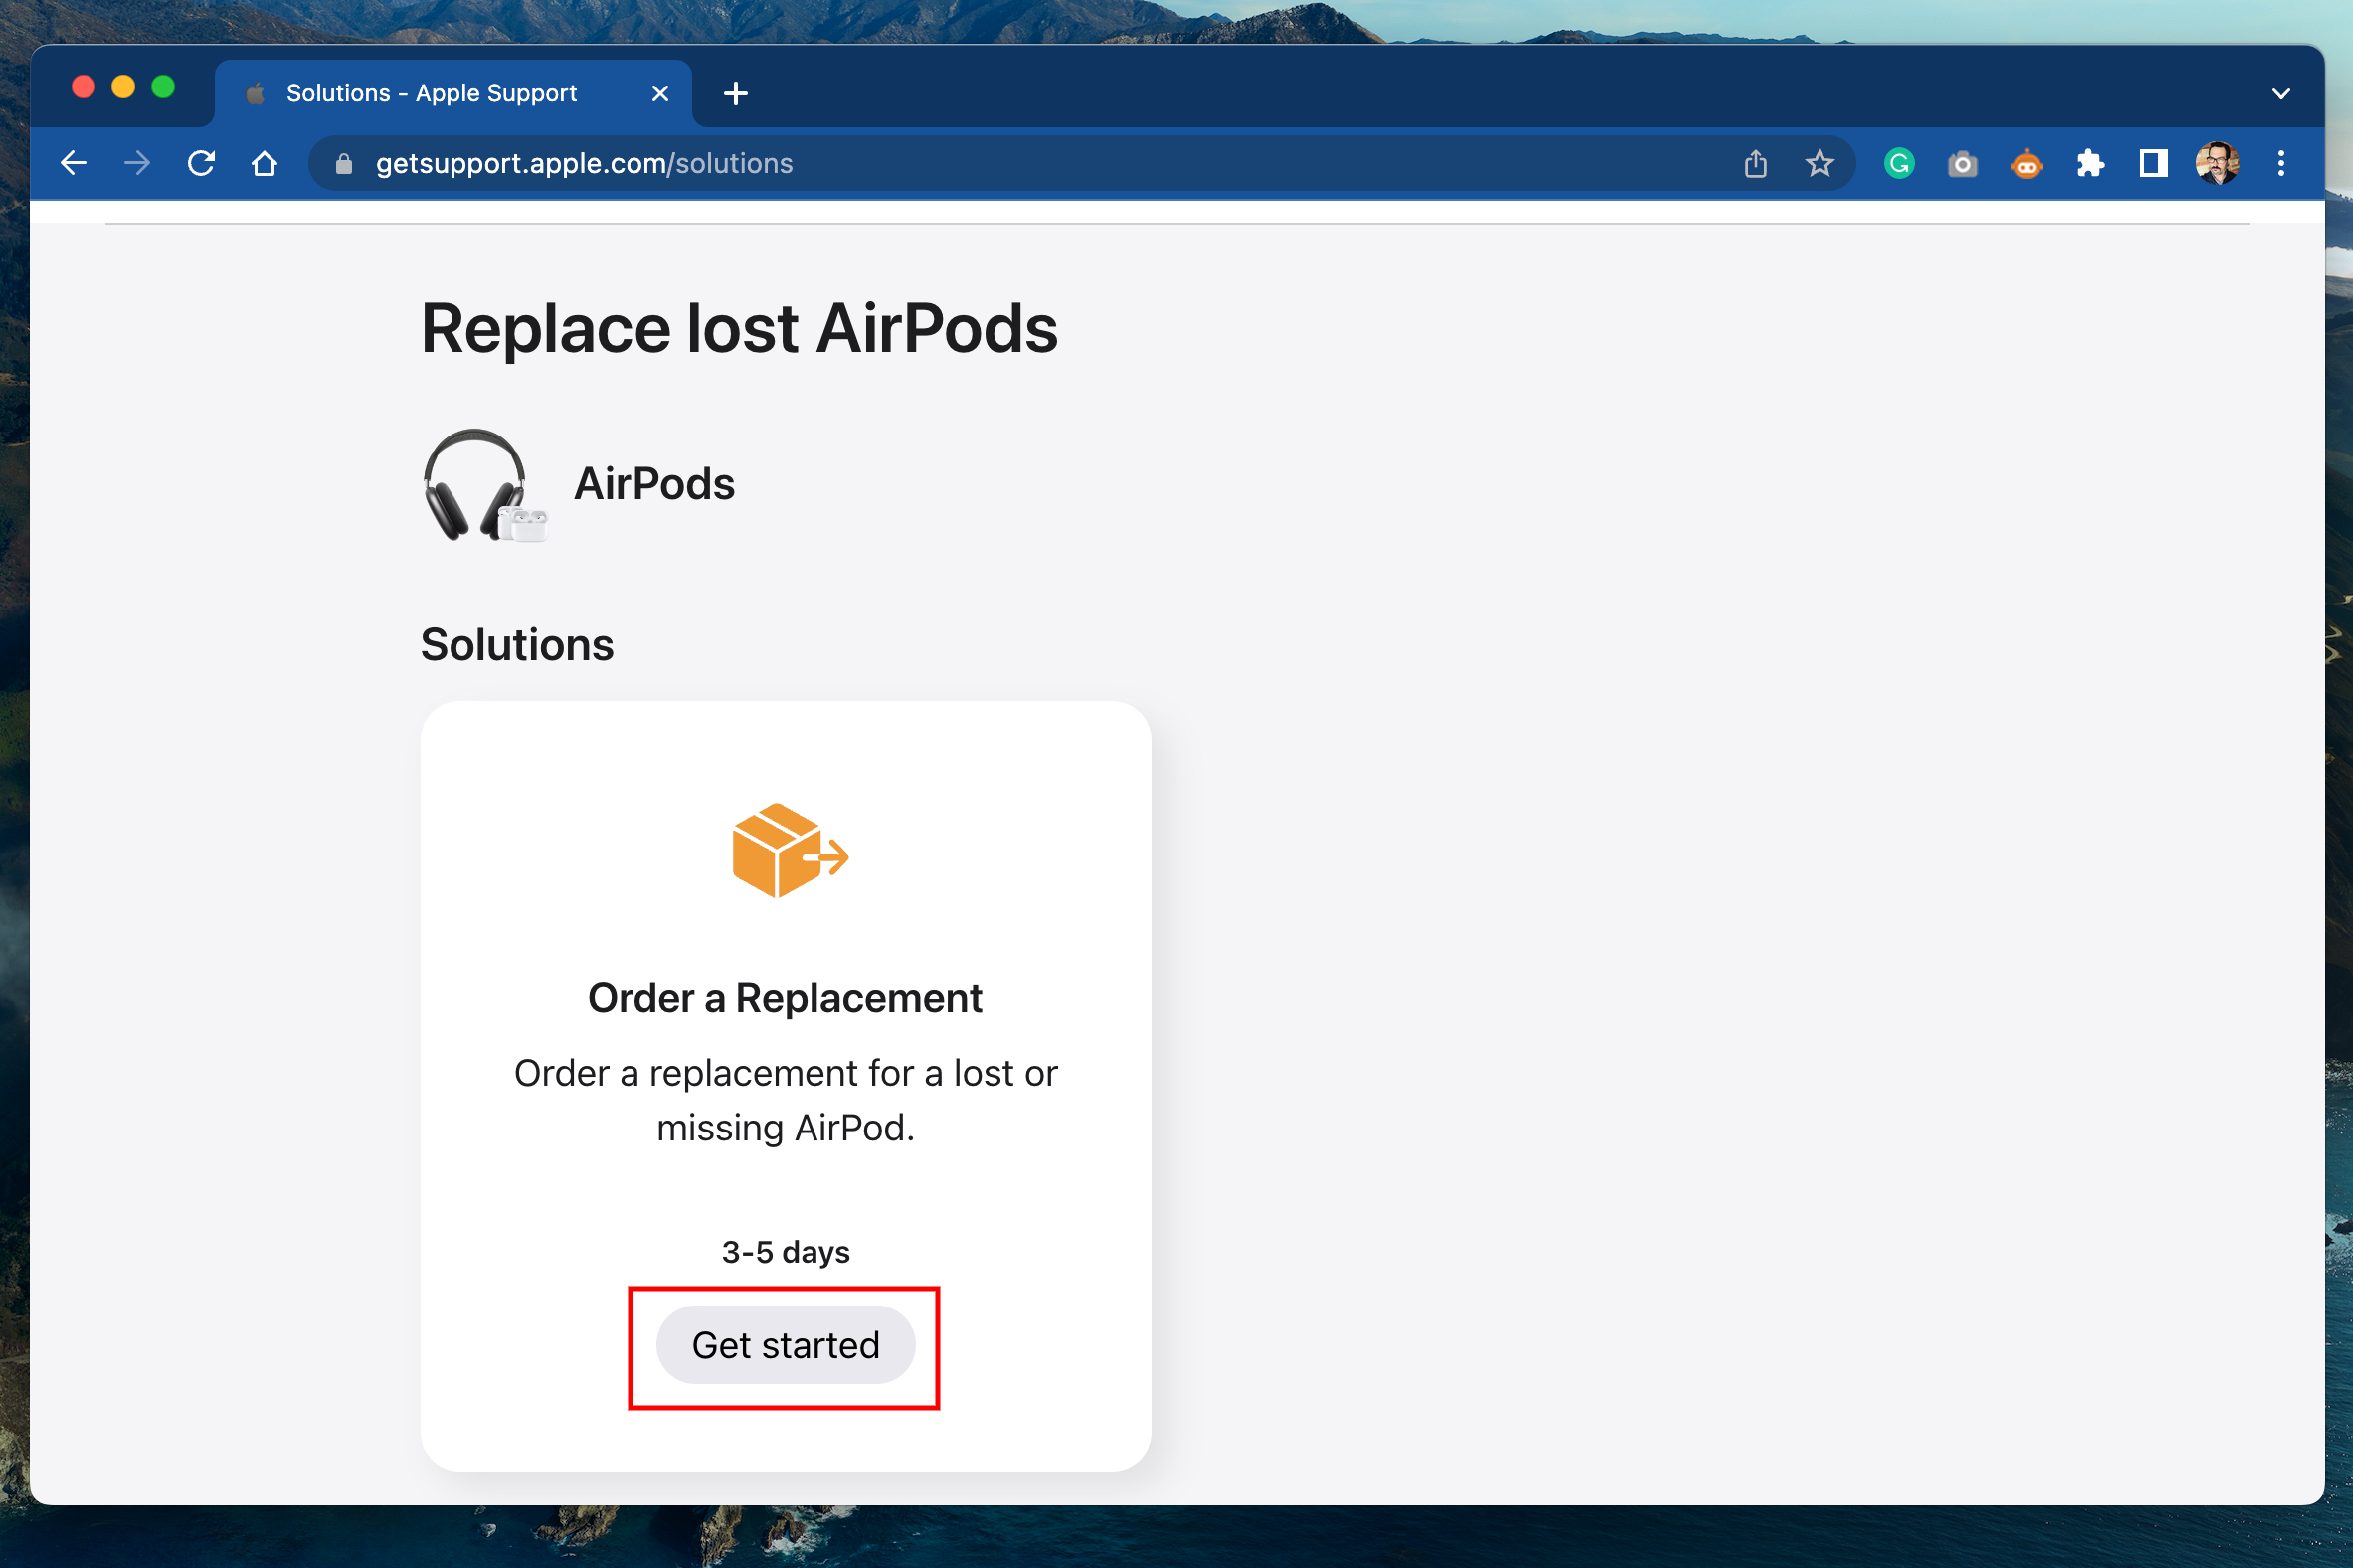 Steps for how to replace lost or missing AirPods – get started.